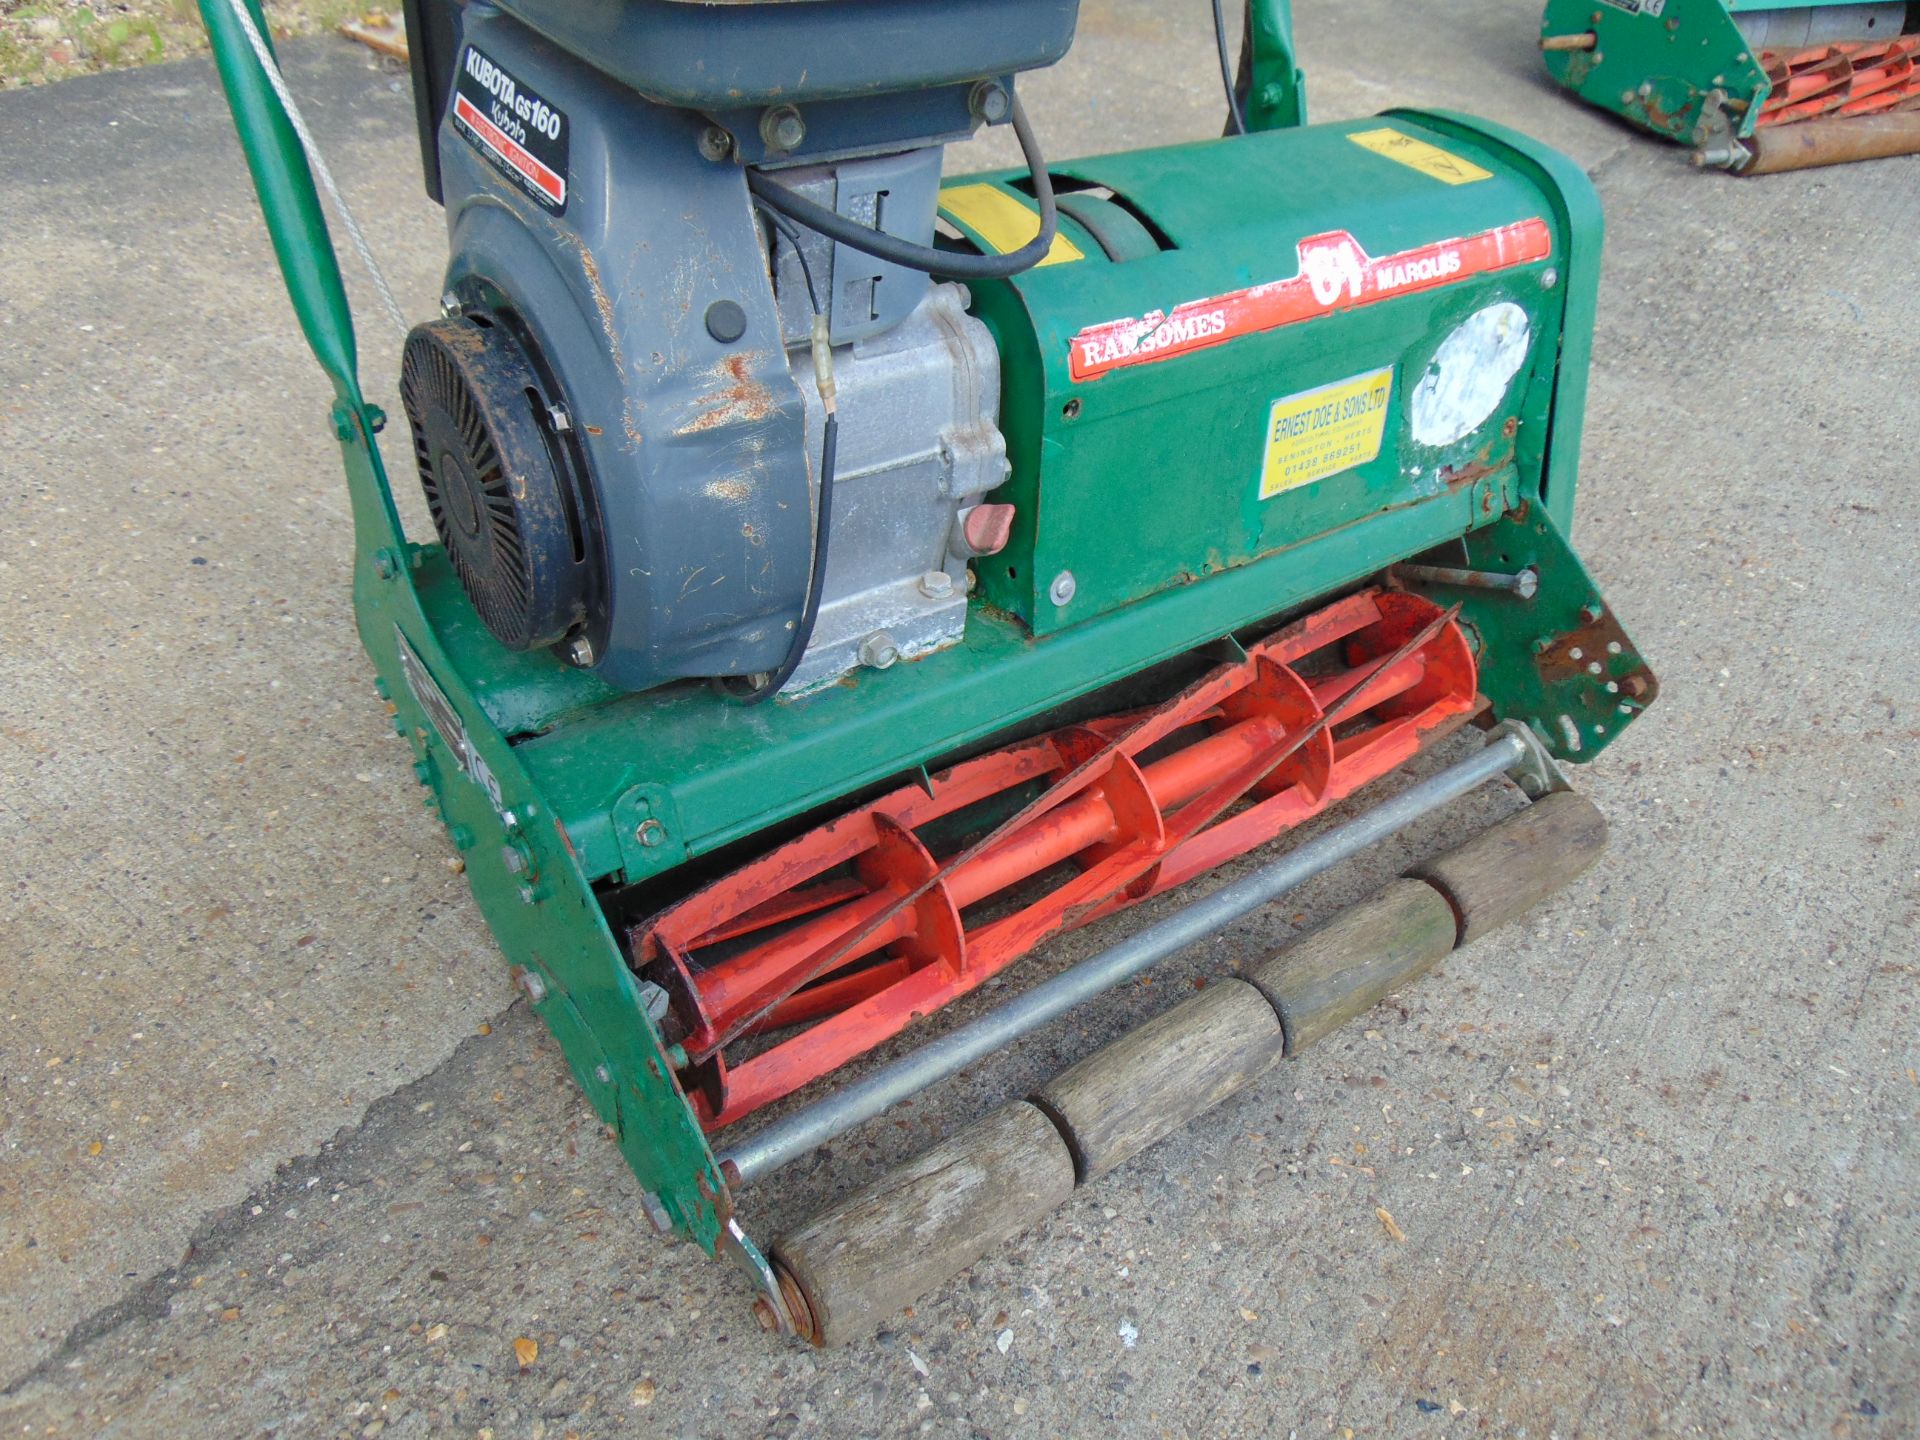 Ransomes Marquis 61 Self Propelled Petrol Cylinder Mower - Image 2 of 6